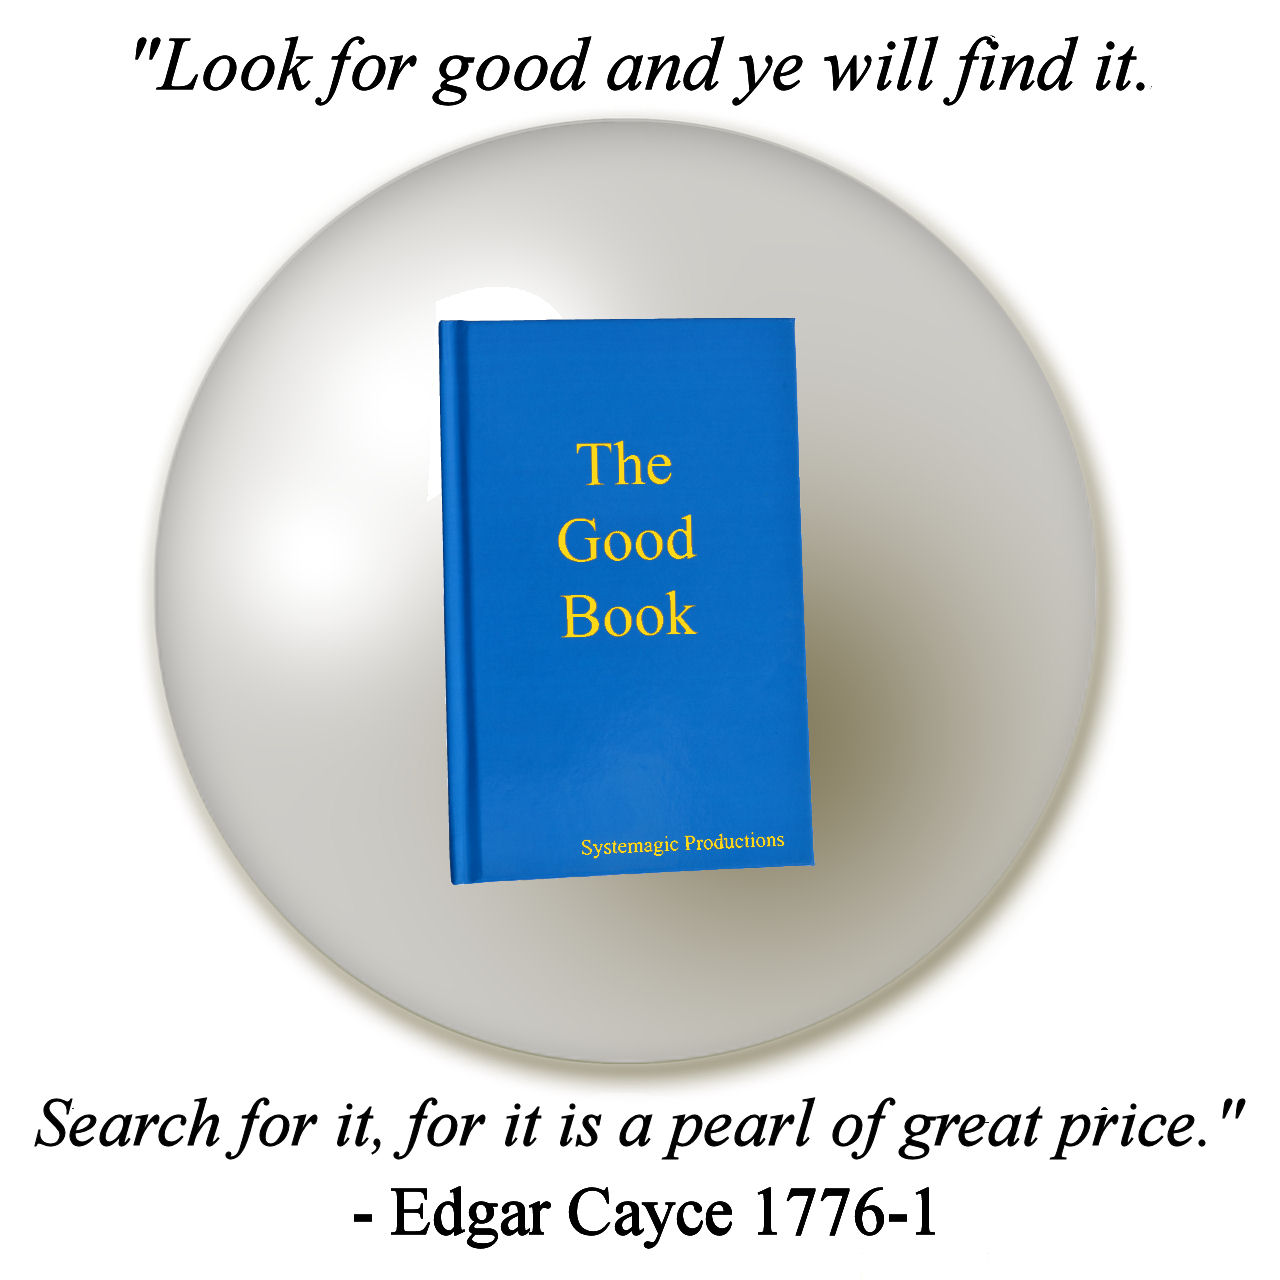 Look for good. Search for it for it is a pearl of great price.